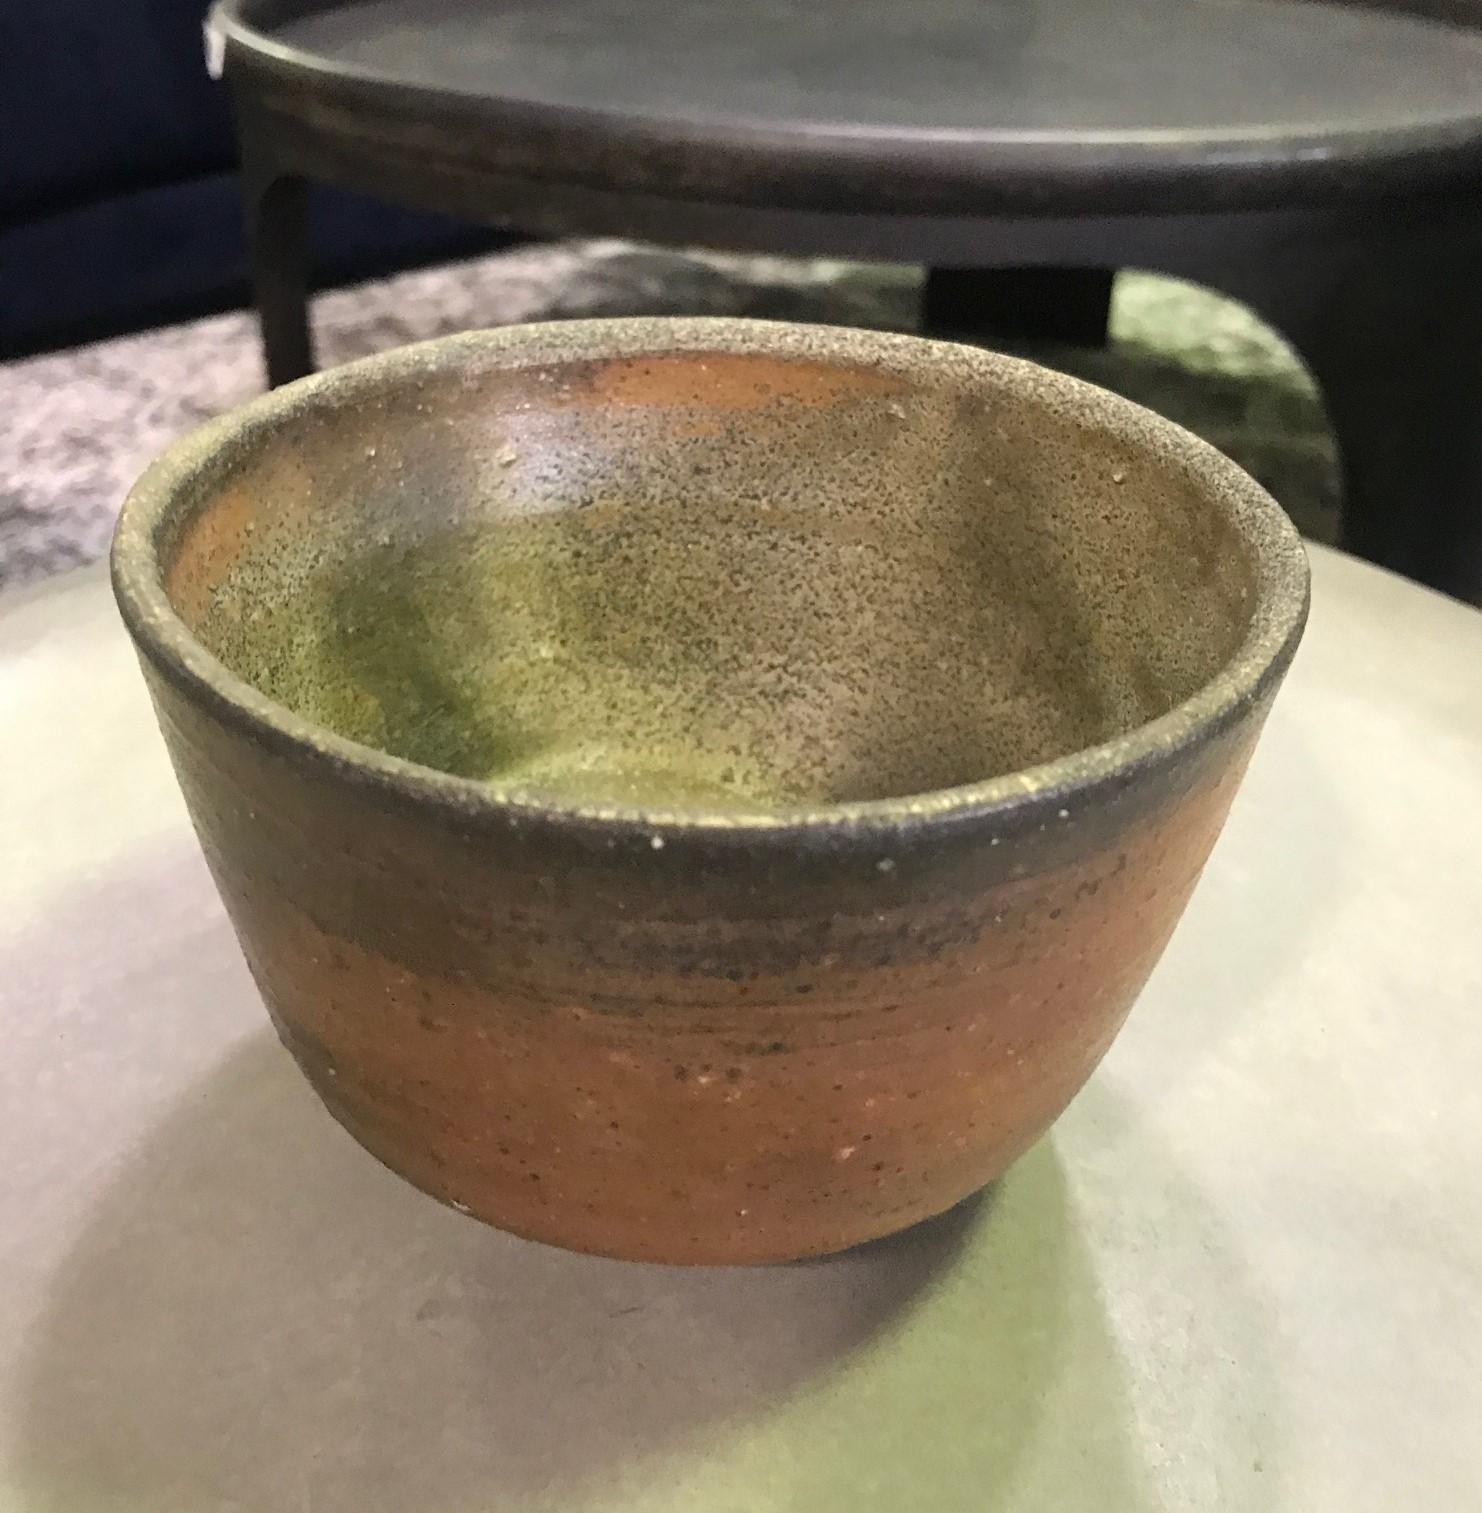 A very attractive and richly colored work by Japanese pottery master Izuru Yamamoto (son of Toshu Yamamoto) who is famed for his Bizen-yaki stoneware pottery made in the Bizen area in the Okayama Prefecture of Japan. Bizen ware is often identifiable